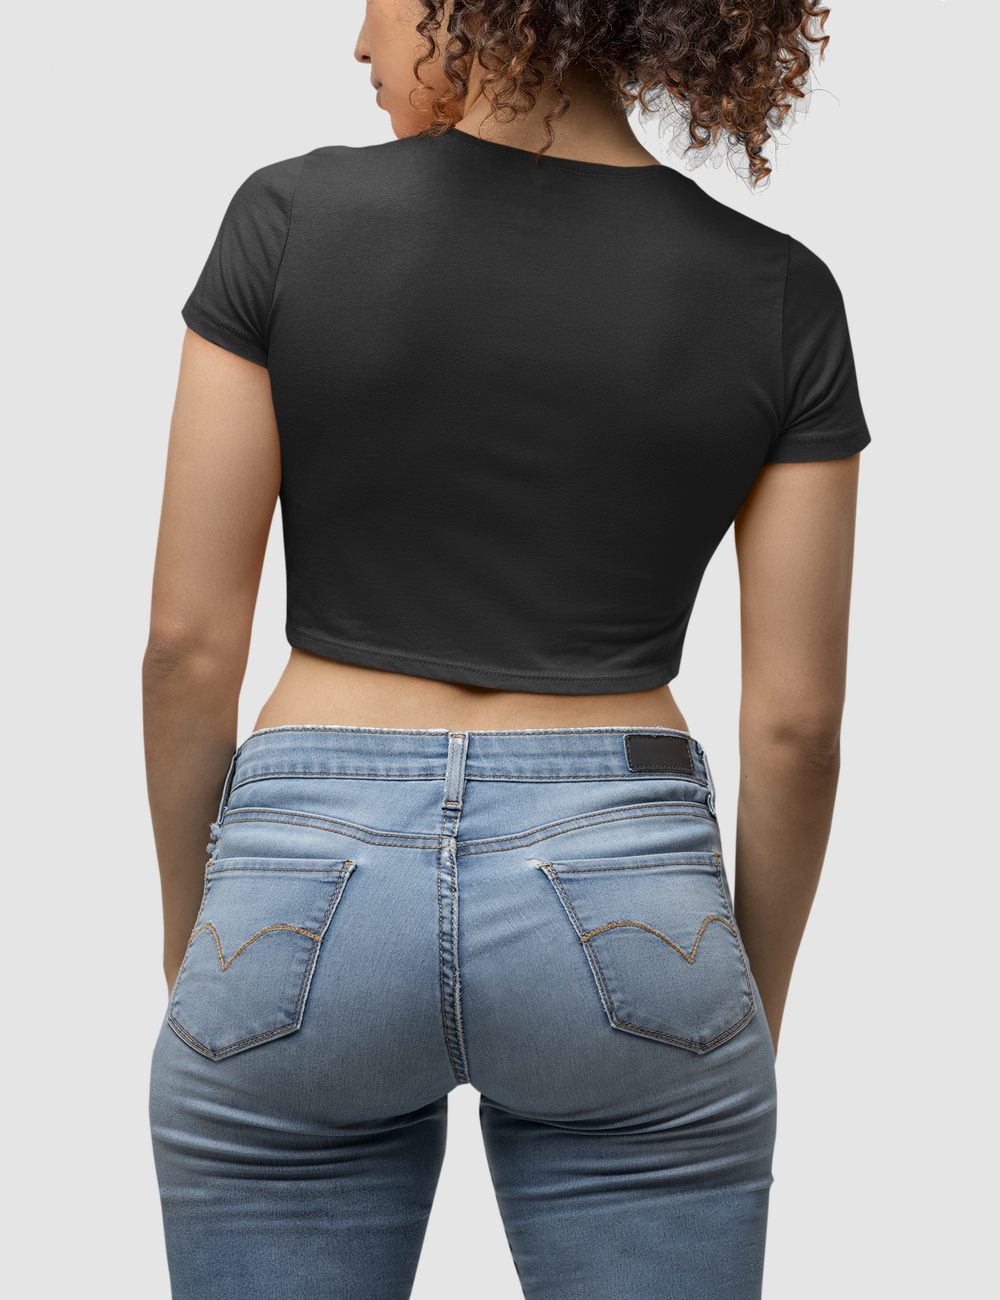 Make A Woman Cum For Once Women's Fitted Crop Top T-Shirt OniTakai